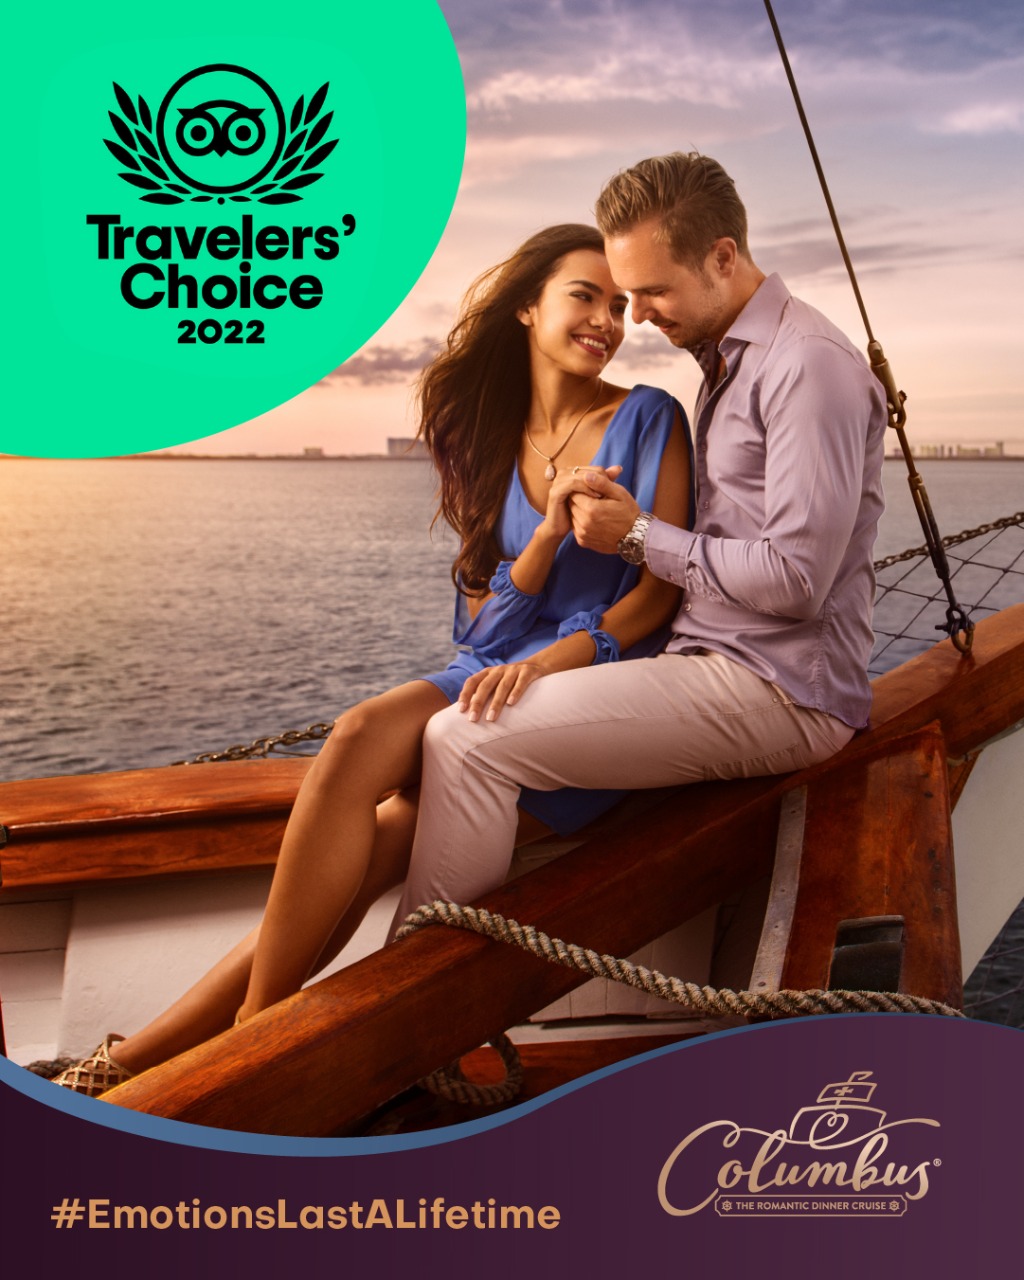 The Dolphin Company brands were Recognized in the Travelers' Choice